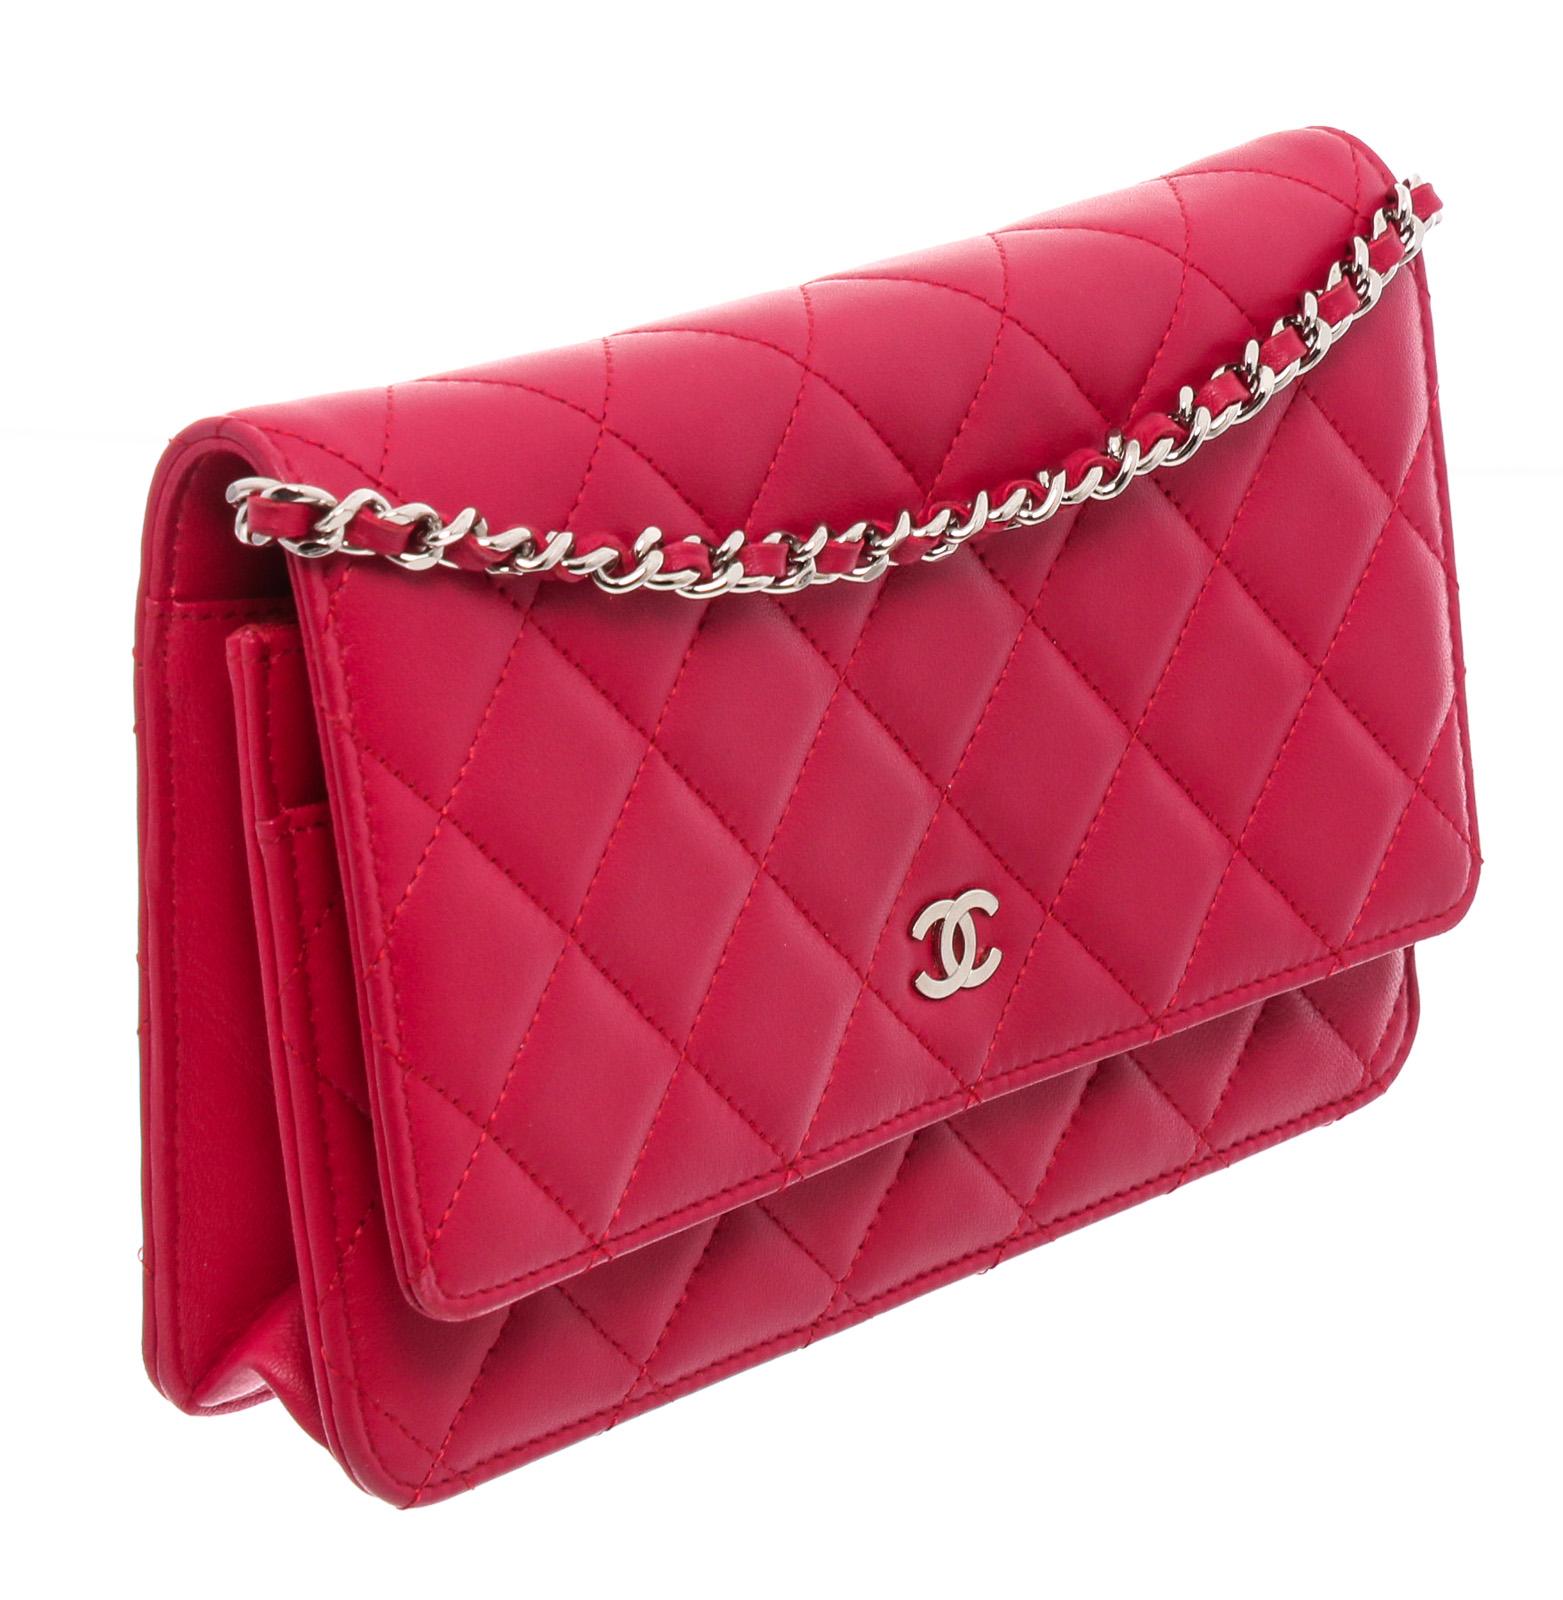 Pink Quilted Lambskin Leather Chanel Wallet On Chain with silver-tone hardware, single leather and chain-link shoulder strap, CC logo adornment at front, single zip pocket flap underside, single slit pocket under front flap, dual compartments; one